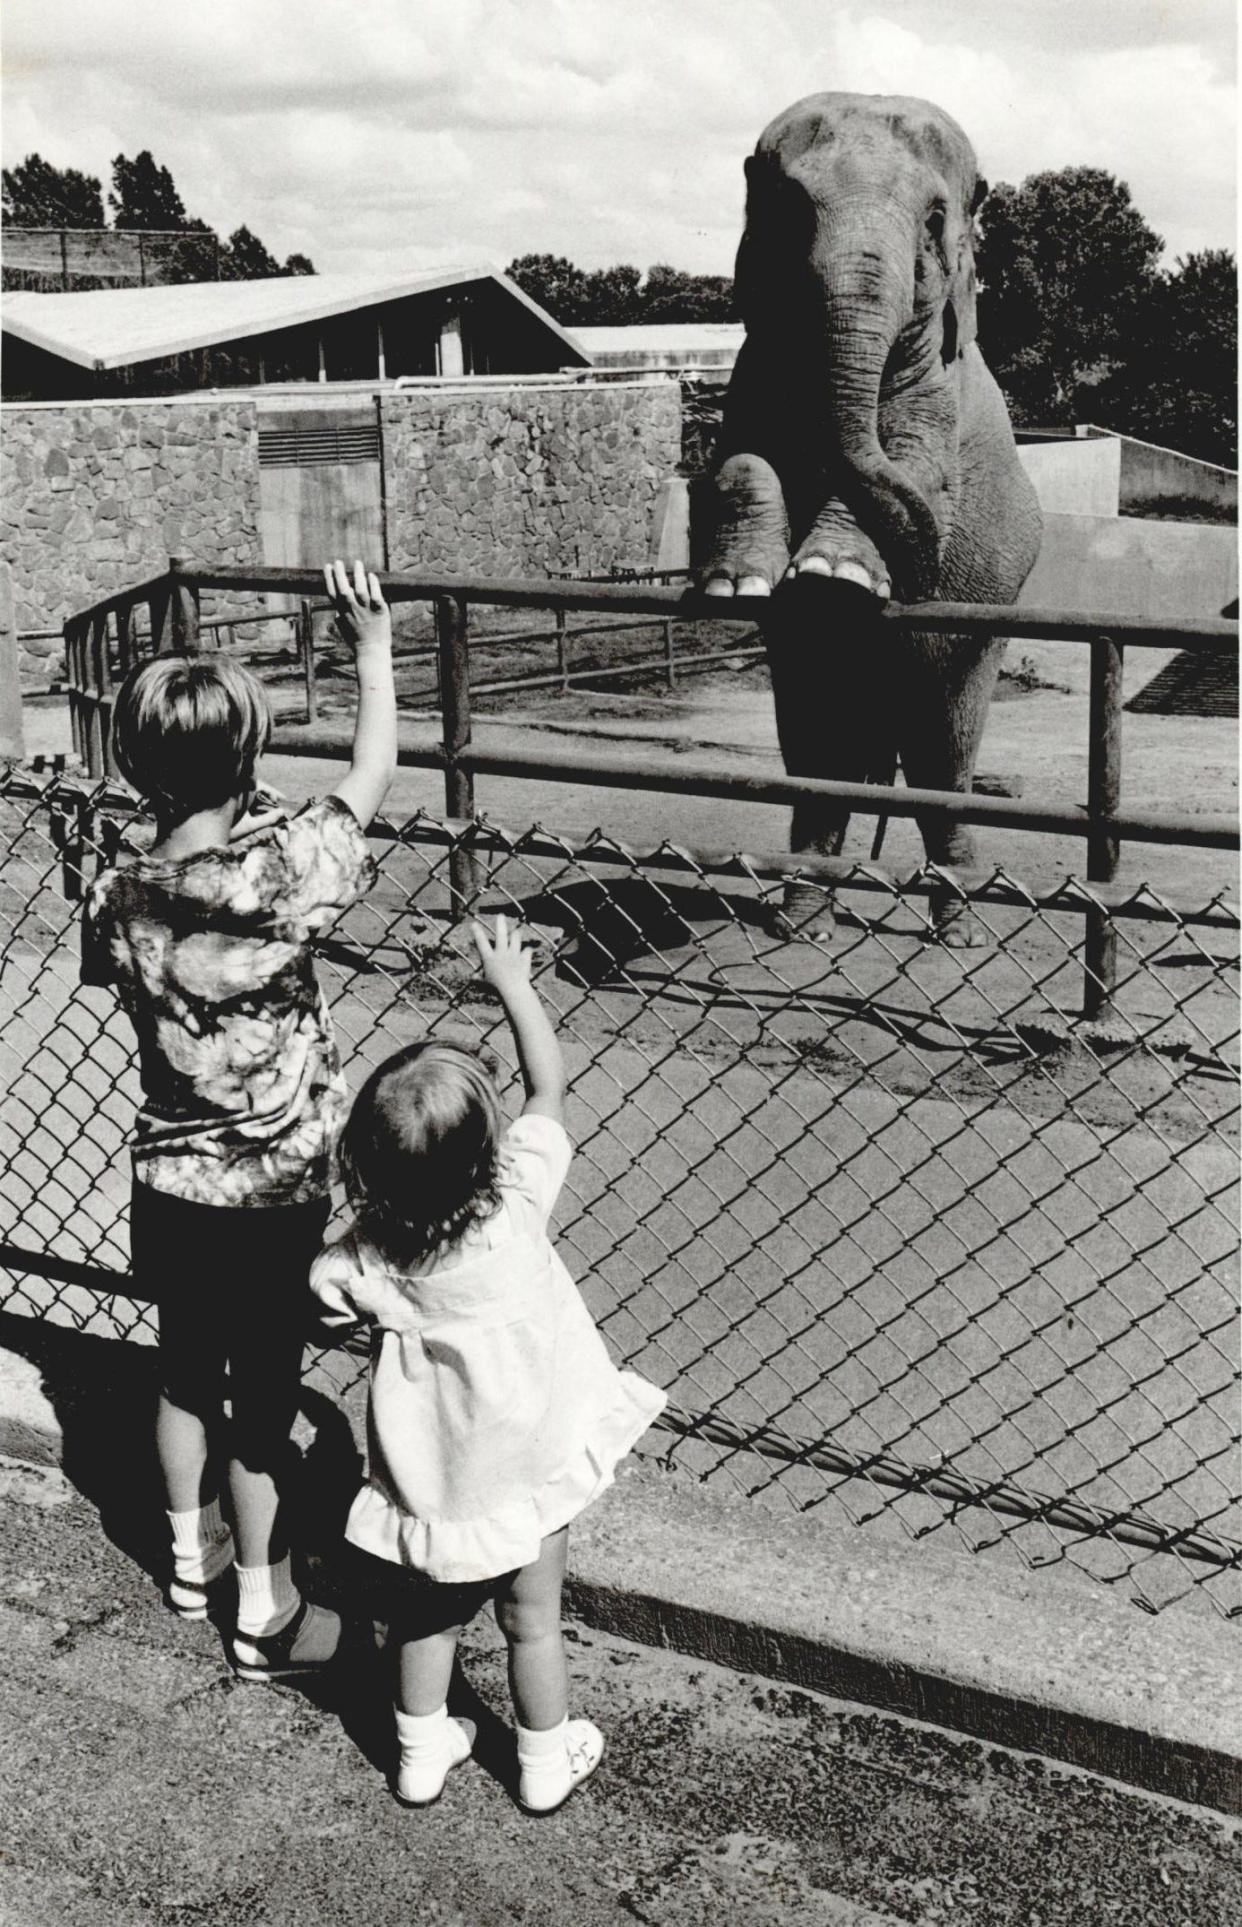 Forest and Alison Foster wave at Judy the elephant, shown in this 1989 photo, before going off to enjoy the party Forest won by coming the closet to guessing Judy's weight in a recent contest. Judy the elephant was a popular resident at the Oklahoma City Zoo from 1949, when schoolchildren statewide raised $3,250 to bring her to the zoo, until her death in 1997.